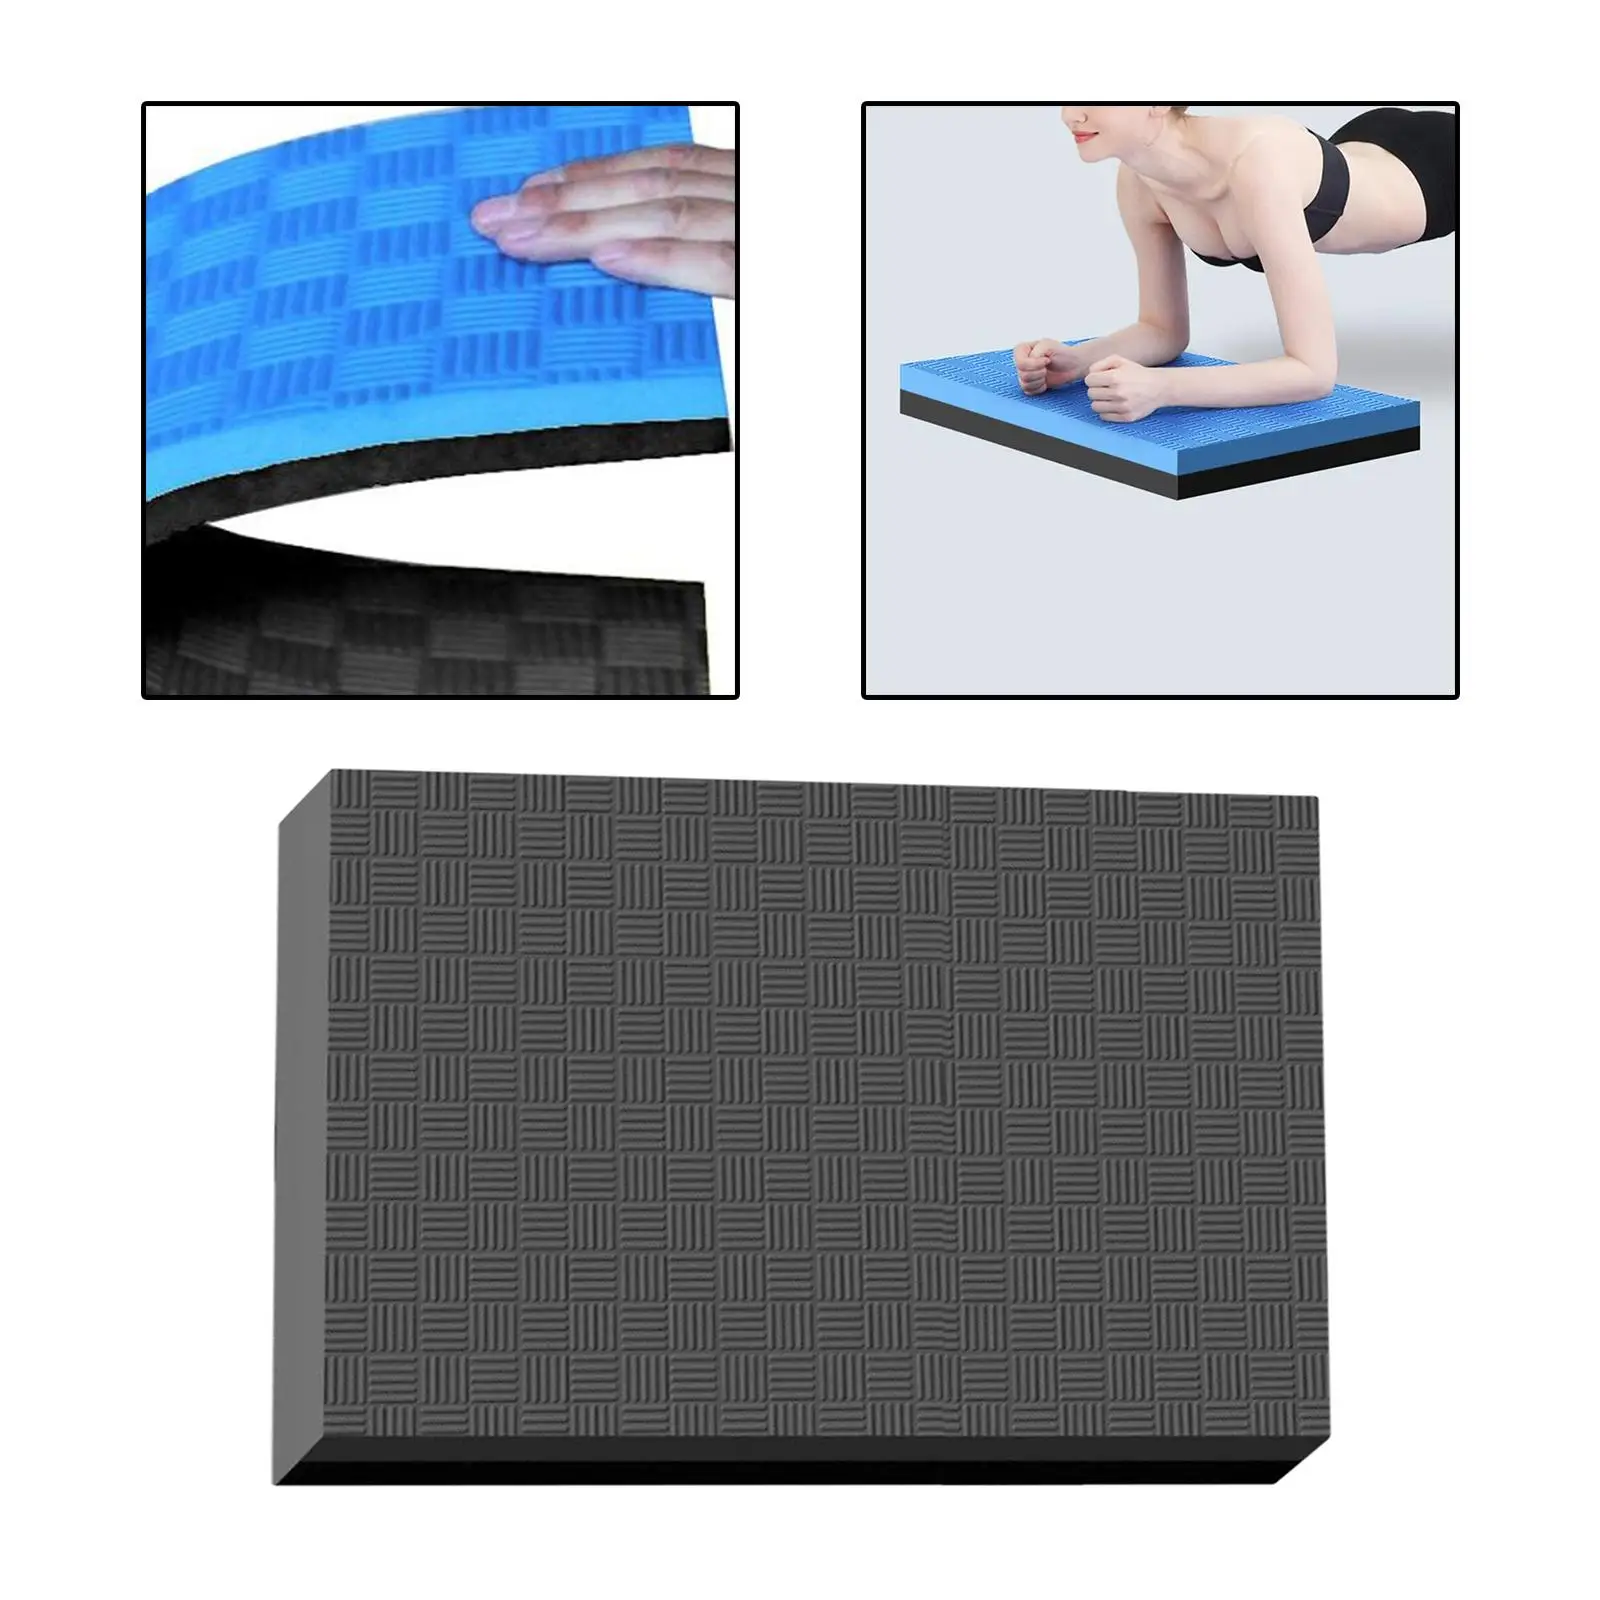 Knee Ankle Cushion Board Equipment Trainer Fitness EVA Balance Pads Yoga Mat Exercise for Dancing Unisex Physical Pilates Work